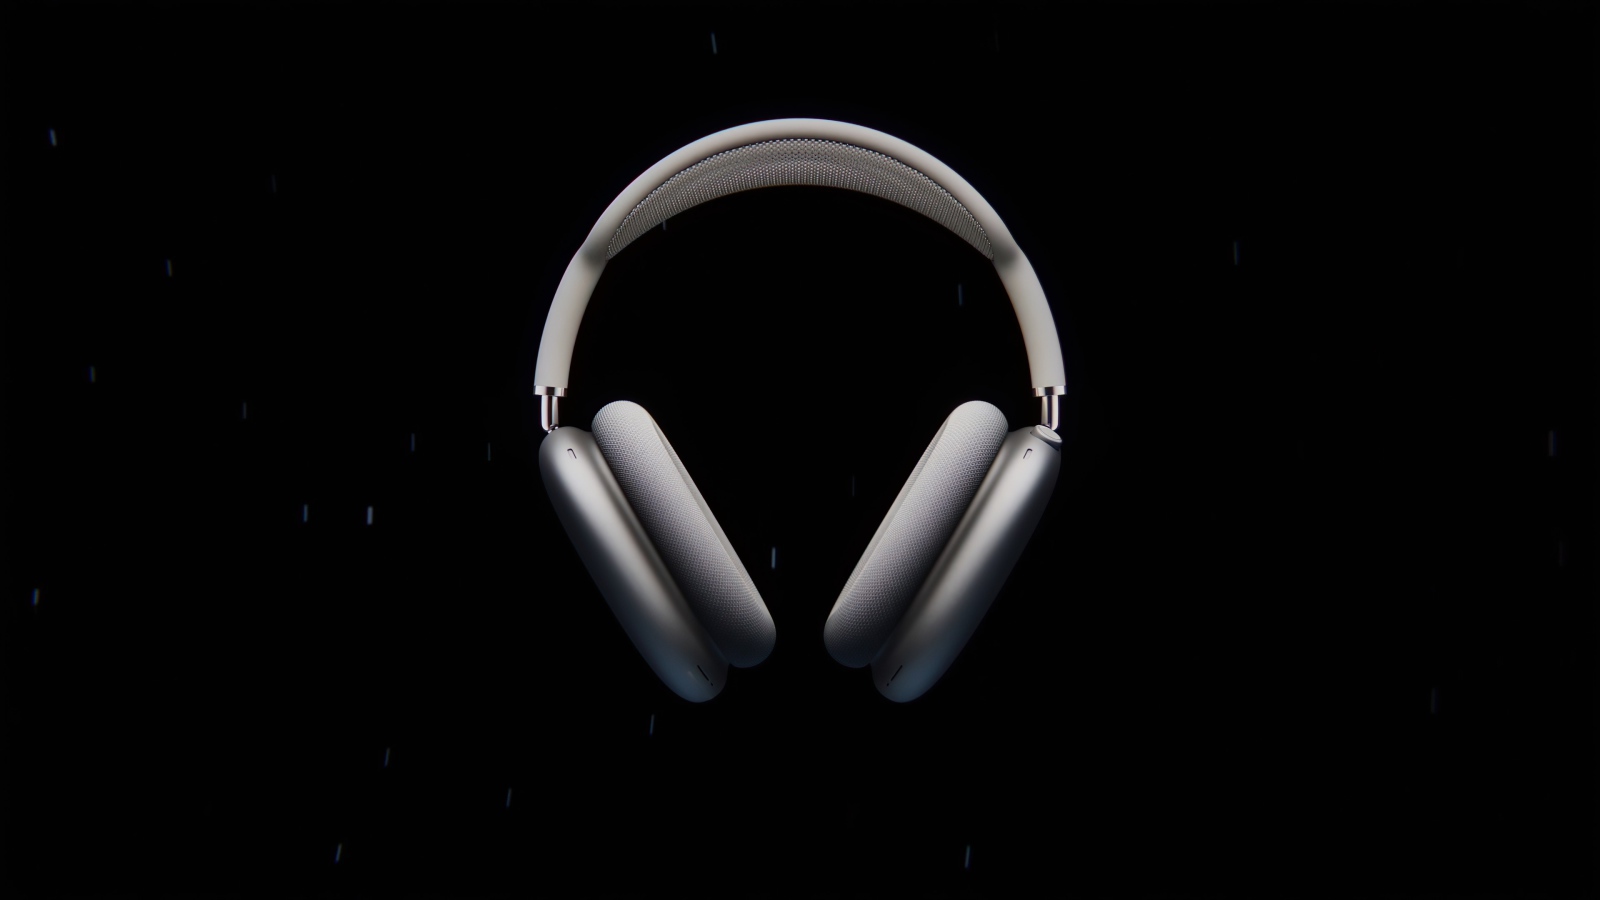 Gray AirPods Max headphones on black background